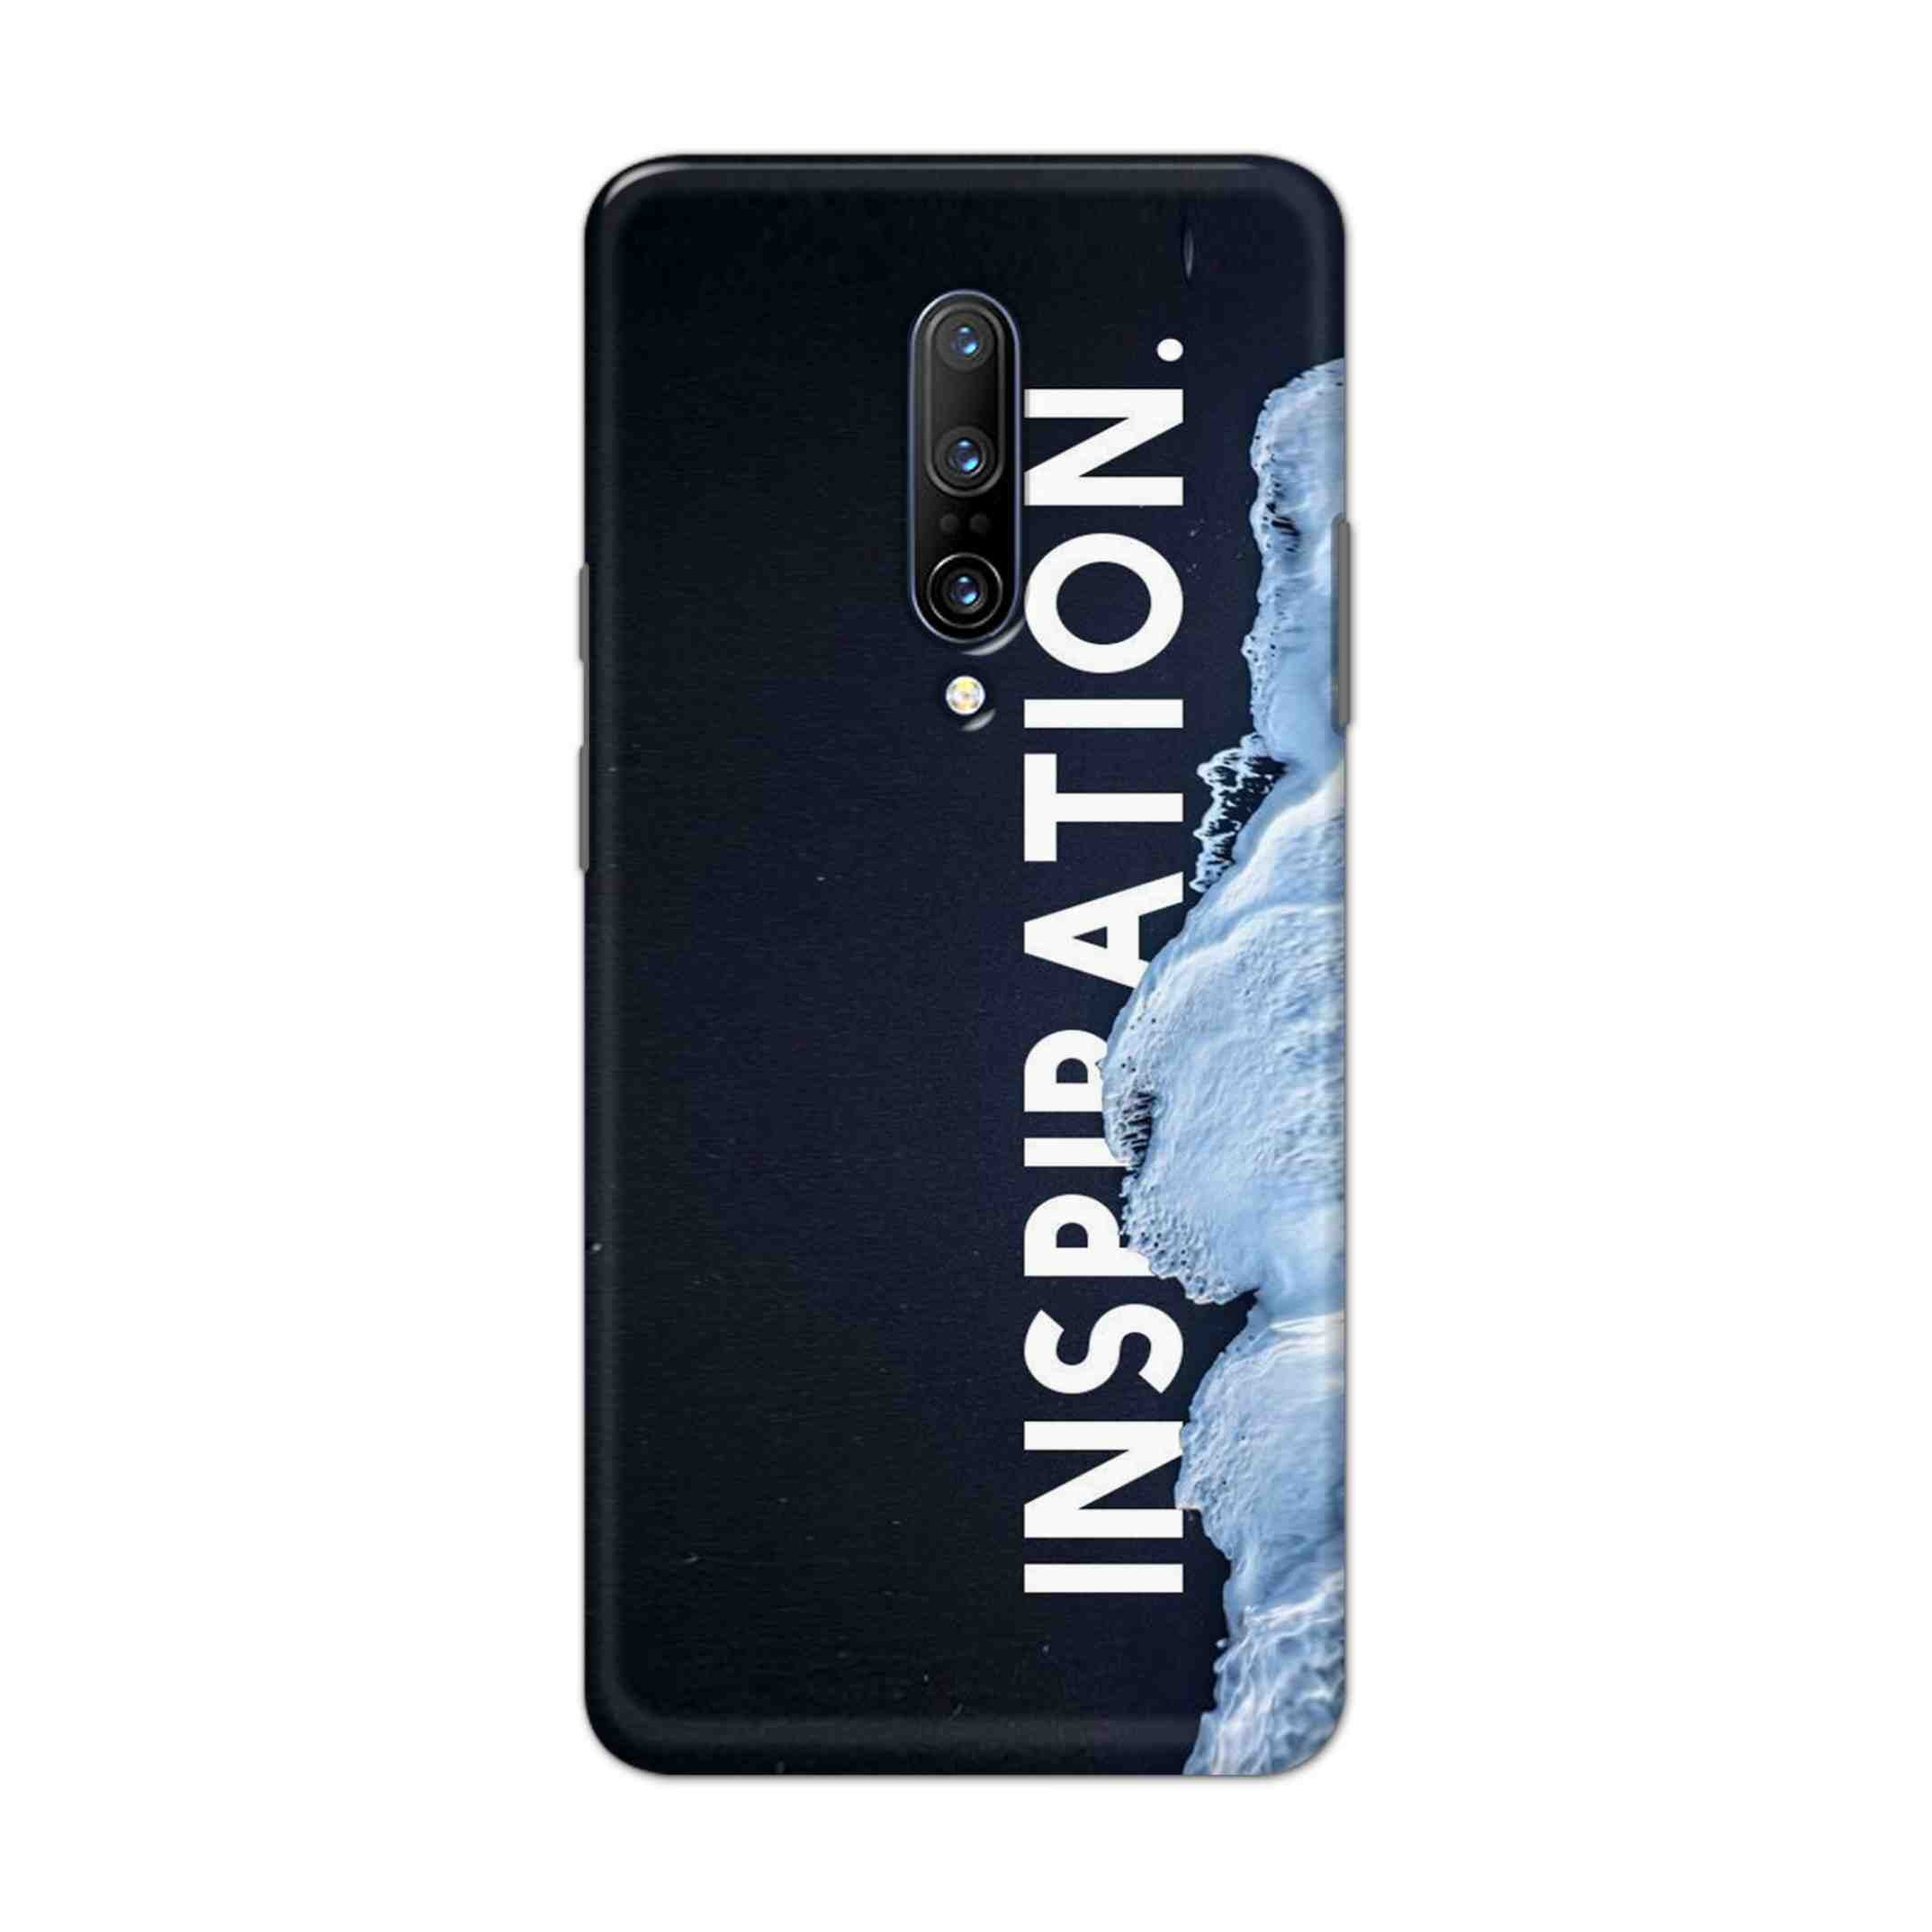 Buy Inspiration Hard Back Mobile Phone Case Cover For OnePlus 7 Pro Online